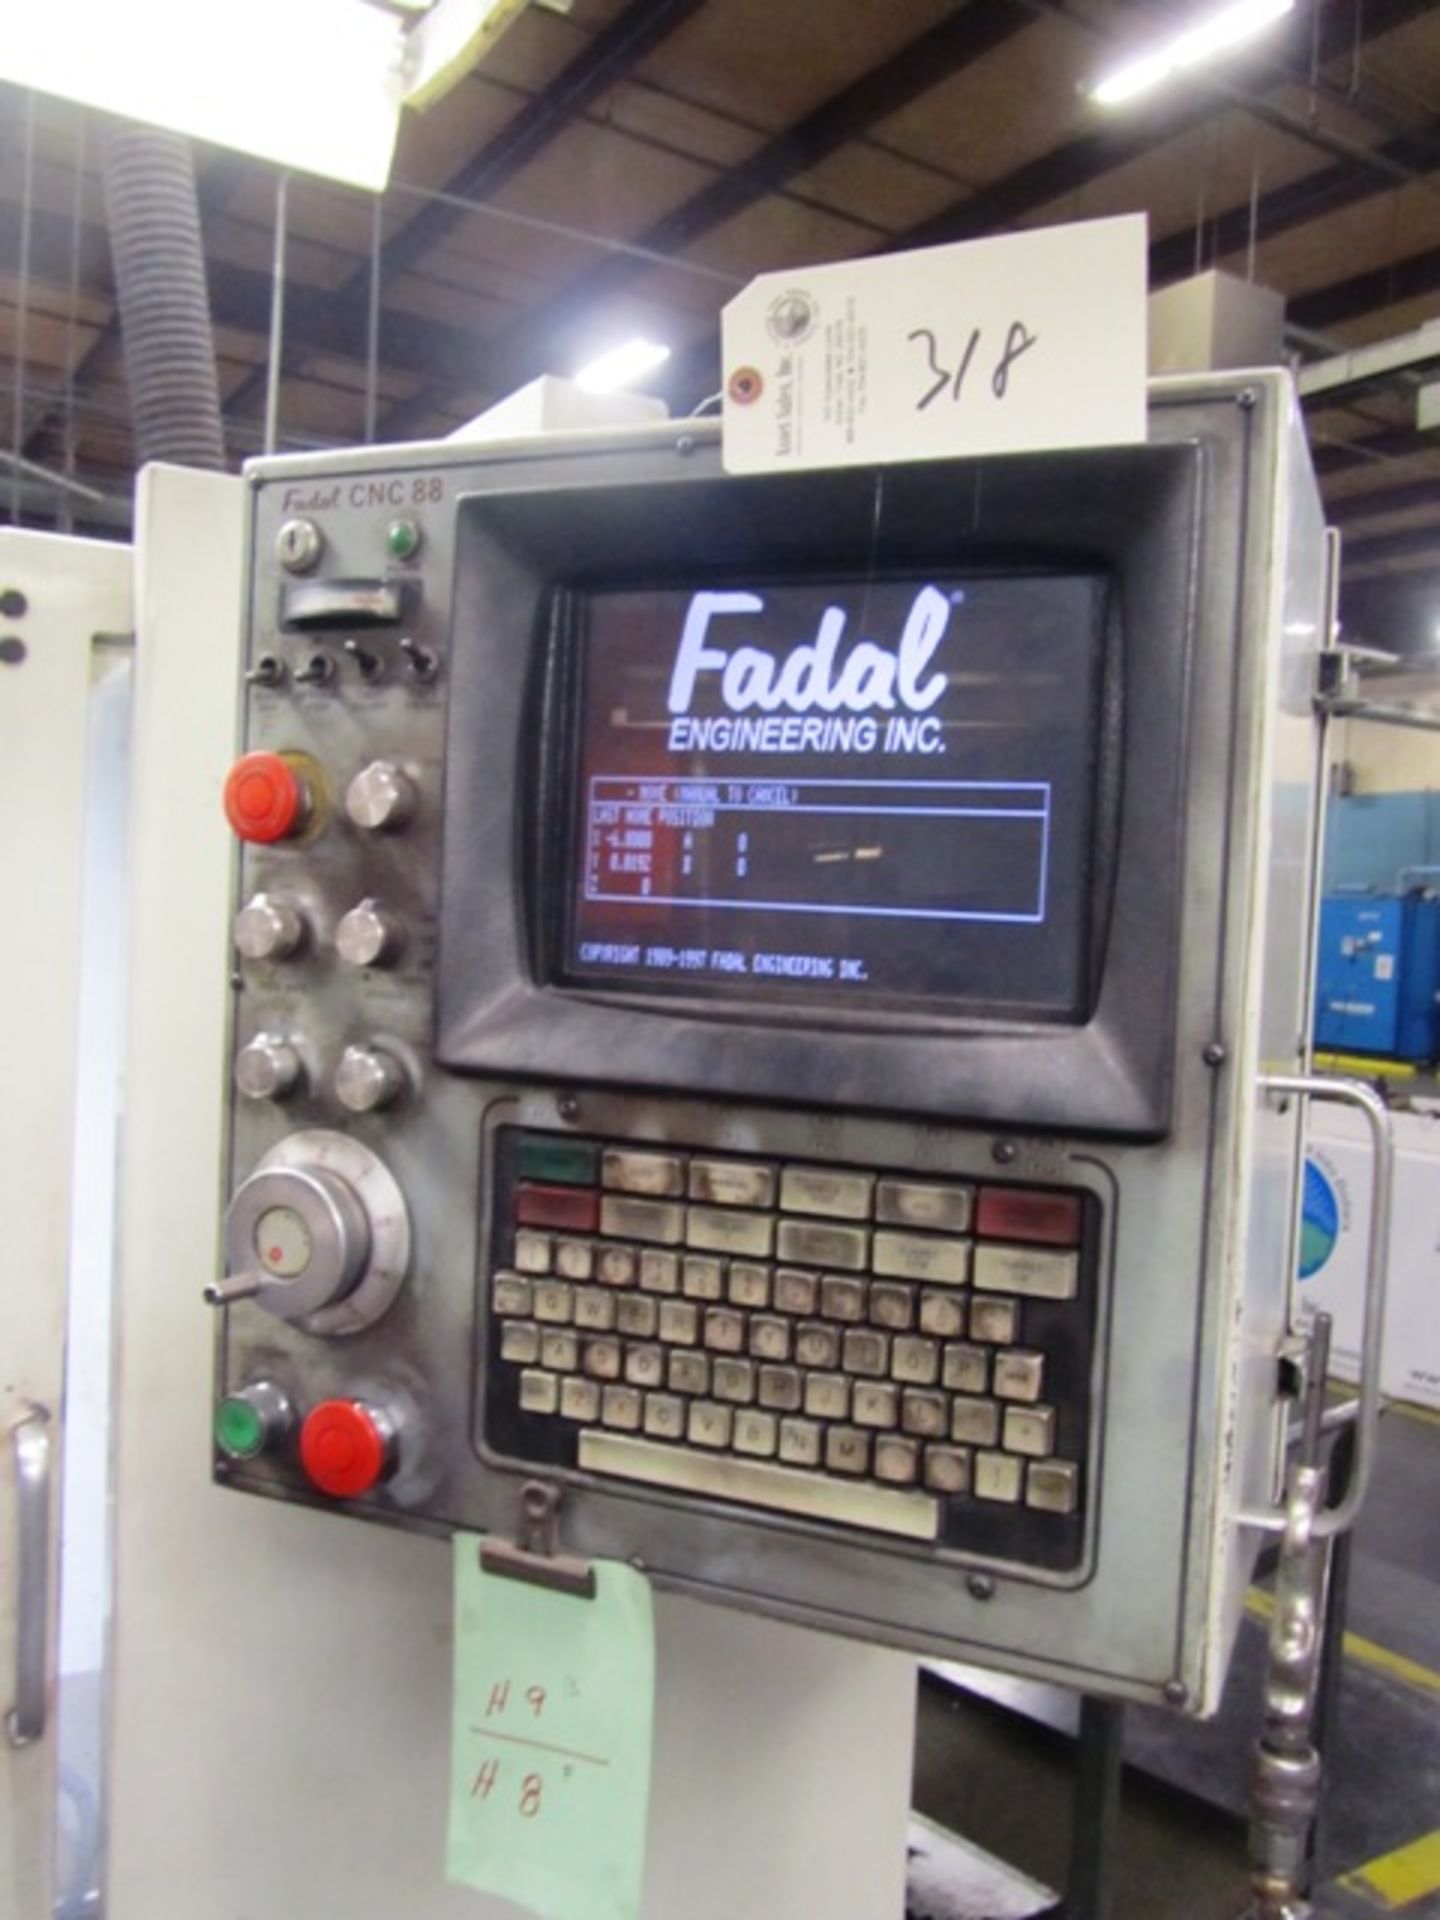 Fadal VMC 20 Vertical Milling Machine with 16 ATC, 16'' x 48'' Table, 40 Taper, Fadal CNC 88 - Image 2 of 3